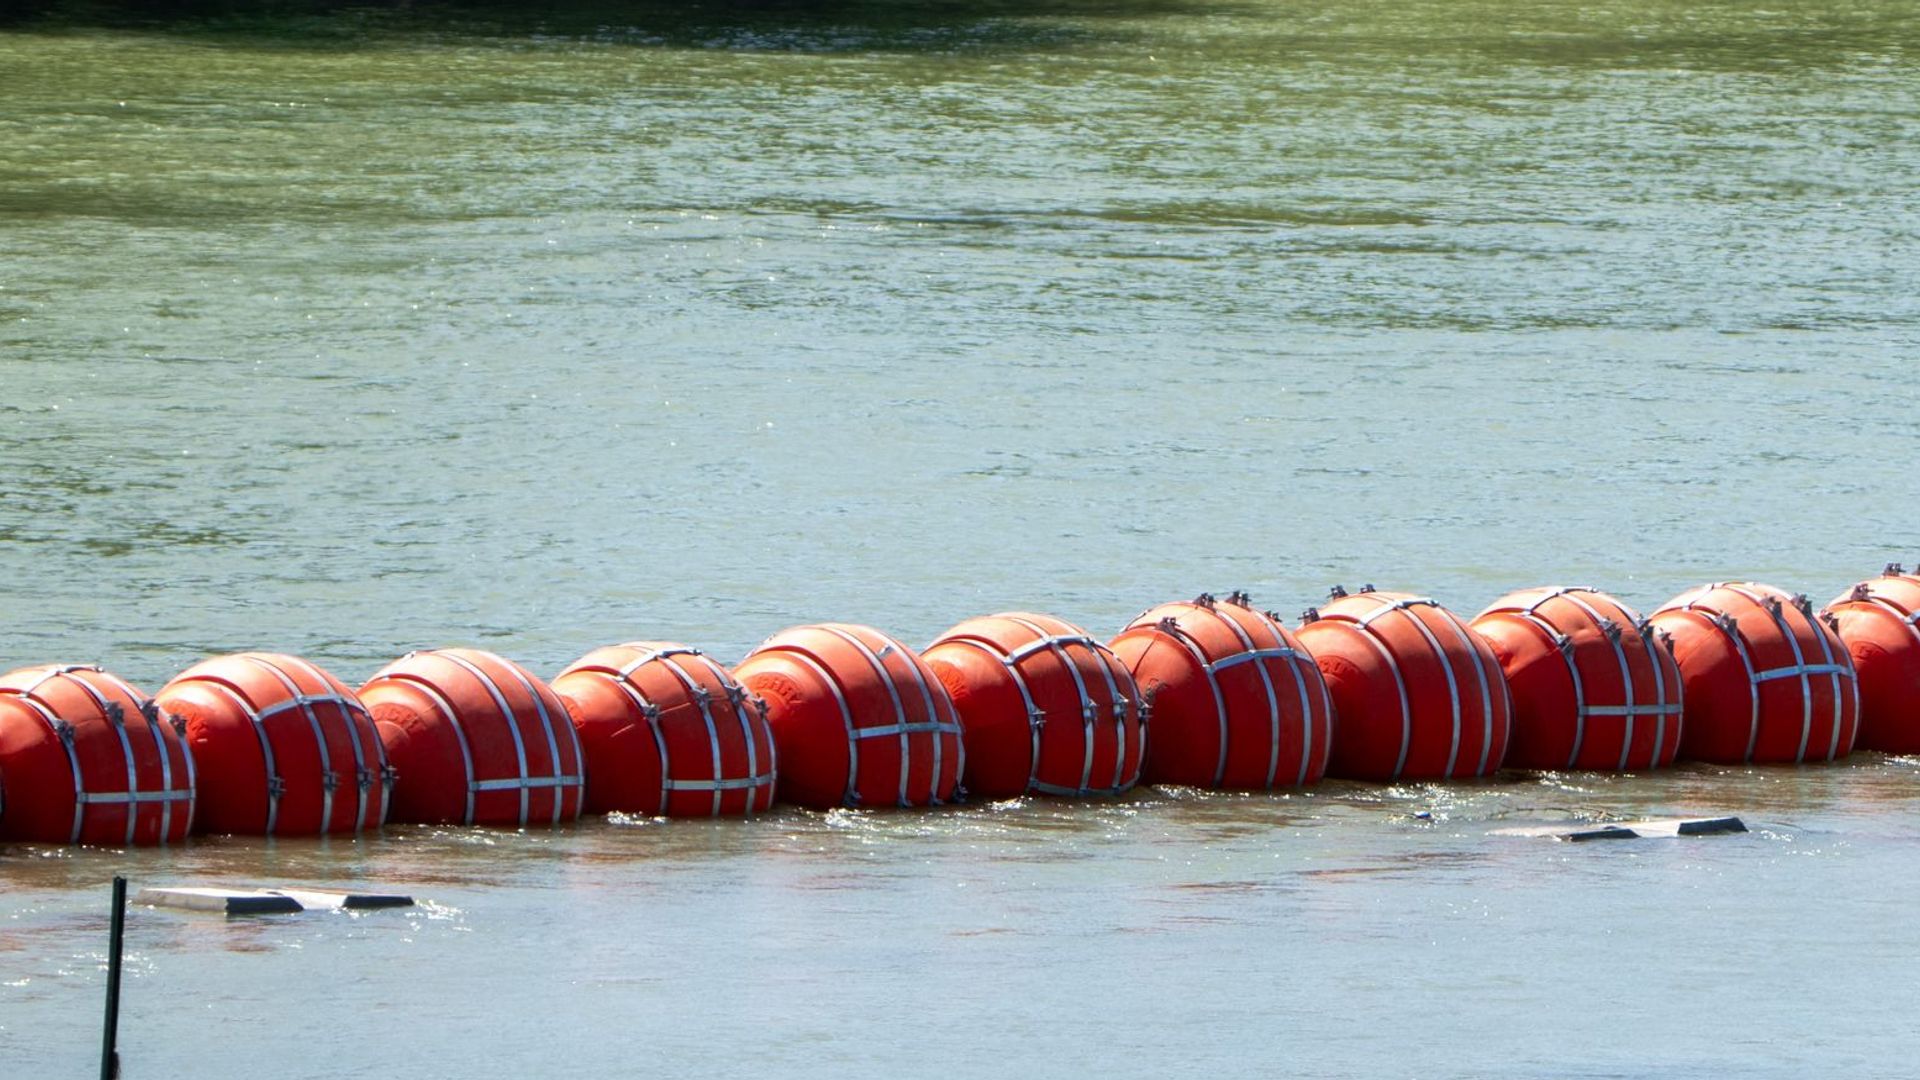 Mexico says Texas may be violating international law by installing a border wall made up of orange buoys in the middle of the Rio Grande.